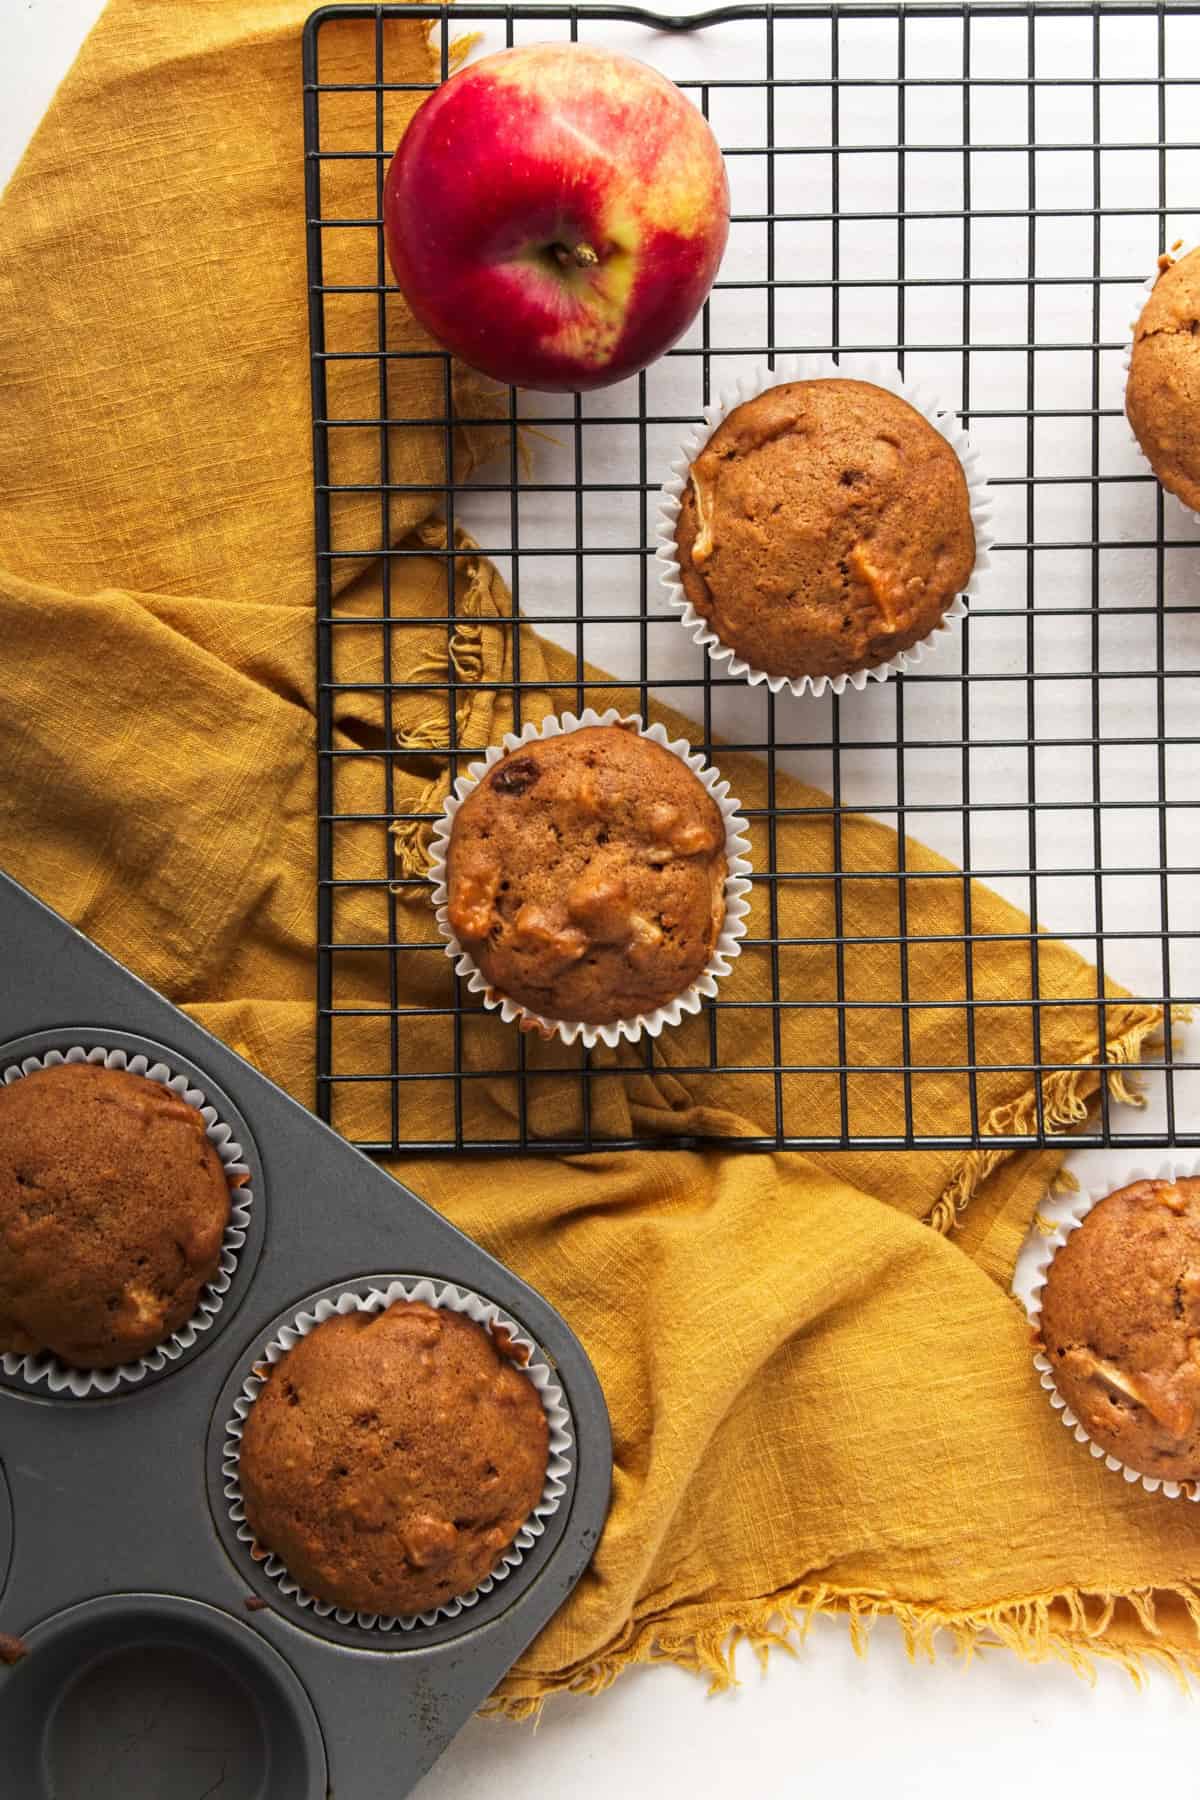 Muffins on a cooling rack next to a muffin tray with a yellow cloth.